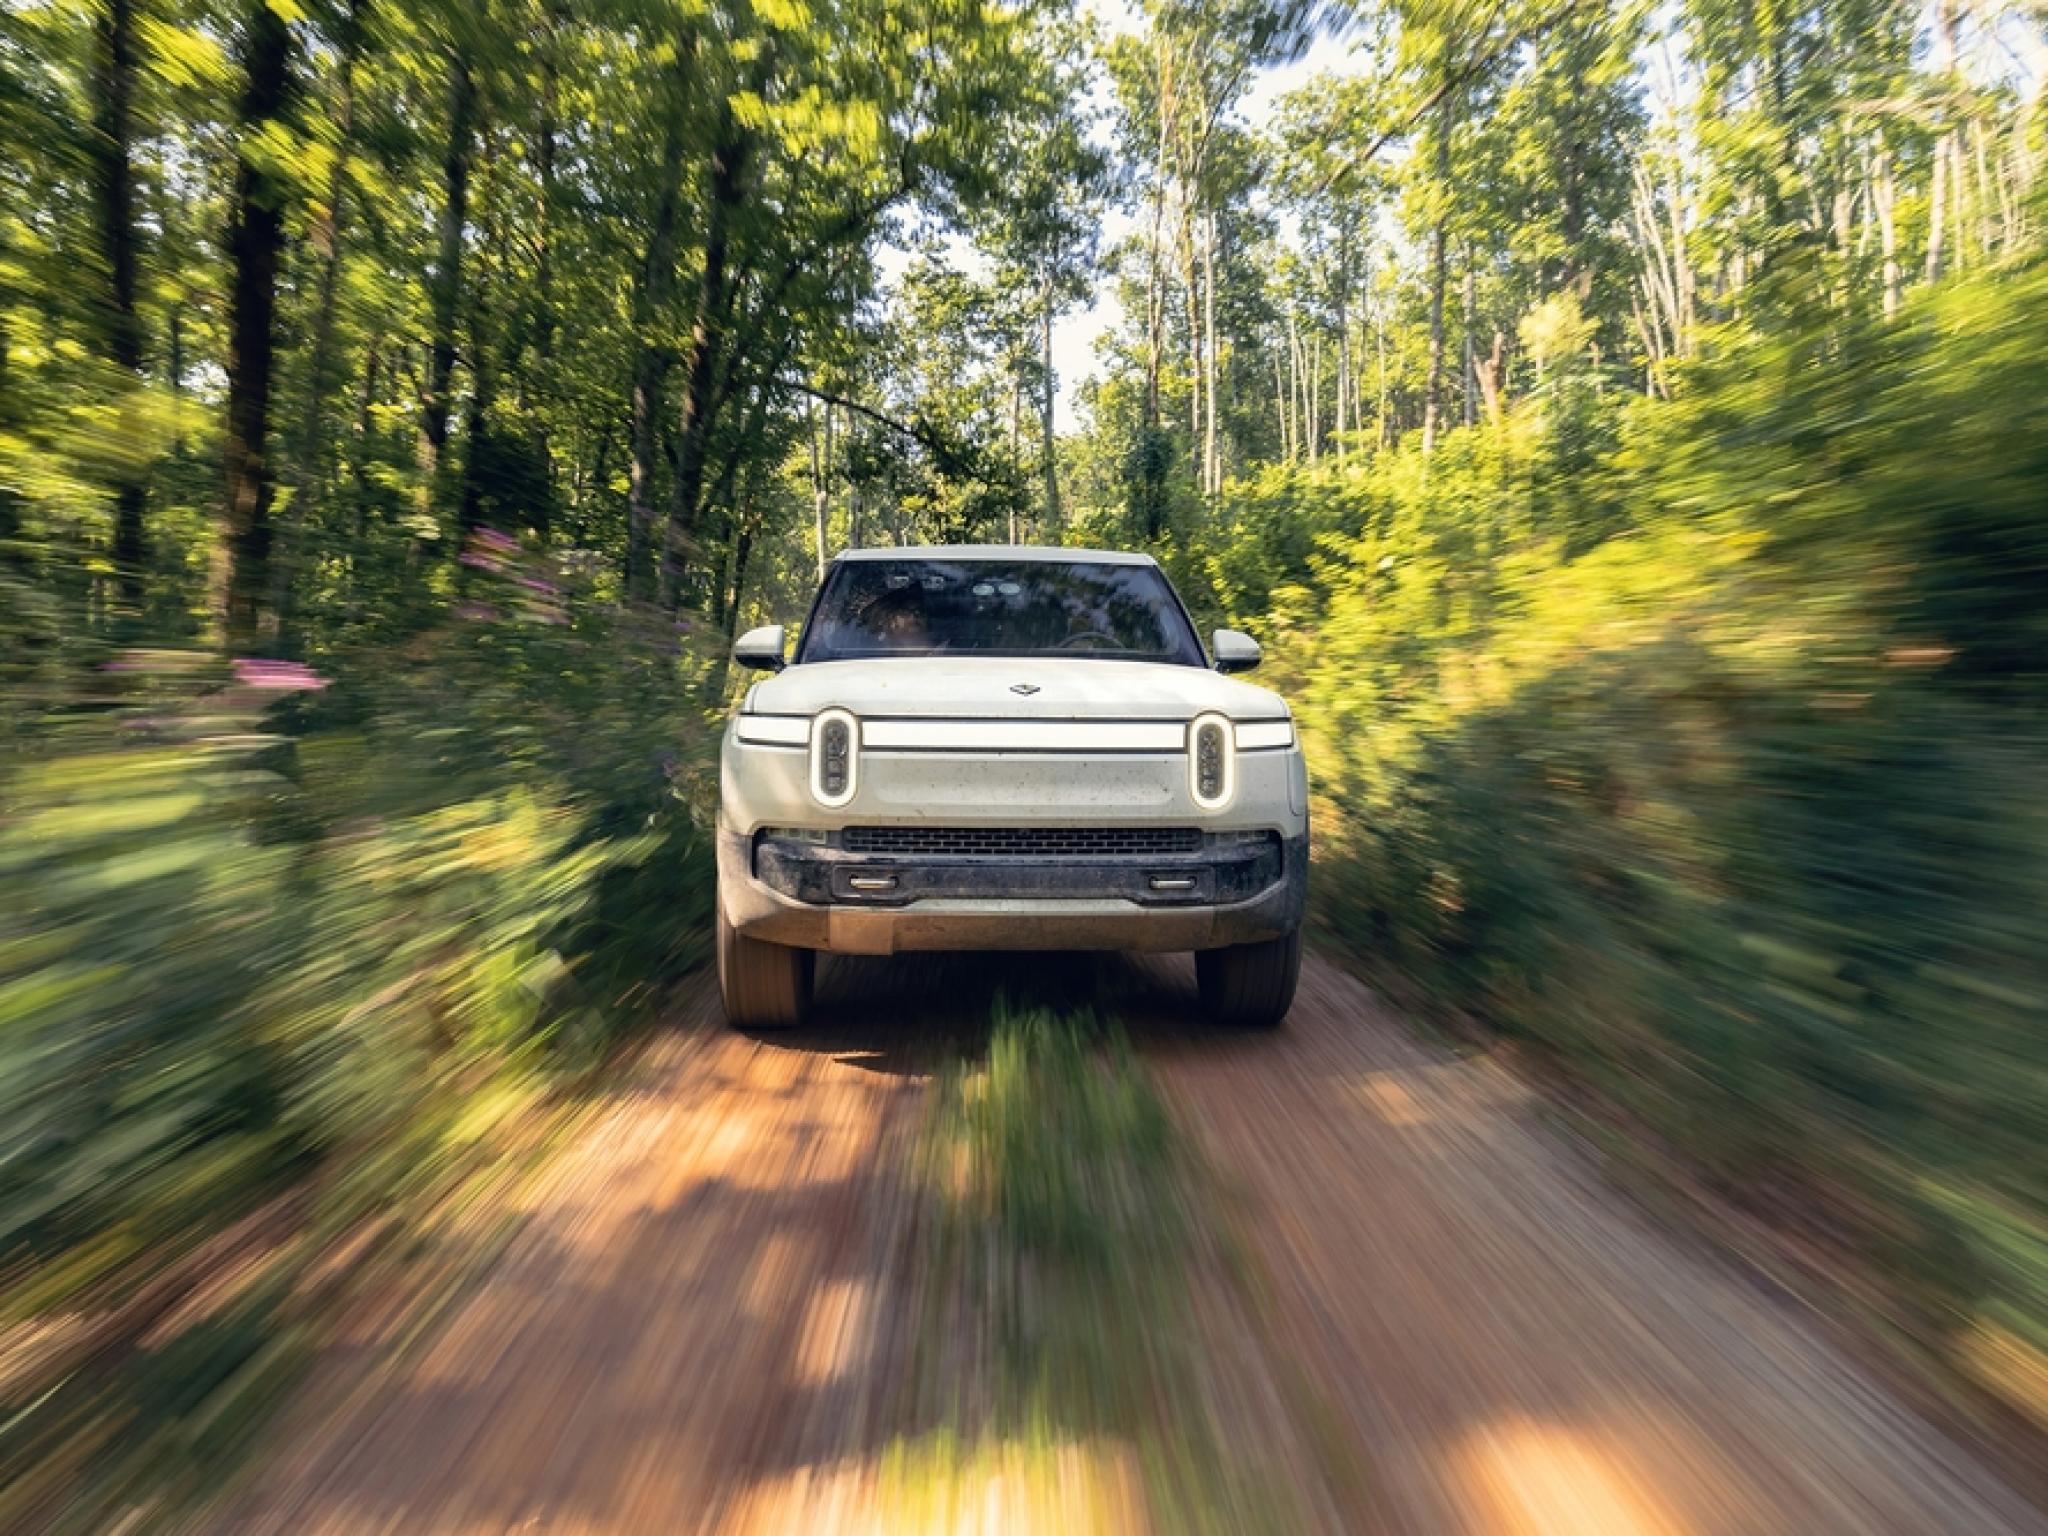  tesla-investor-shows-love-for-battered-rivian-4-reasons-why-he-is-positive-about-the-ev-maker 